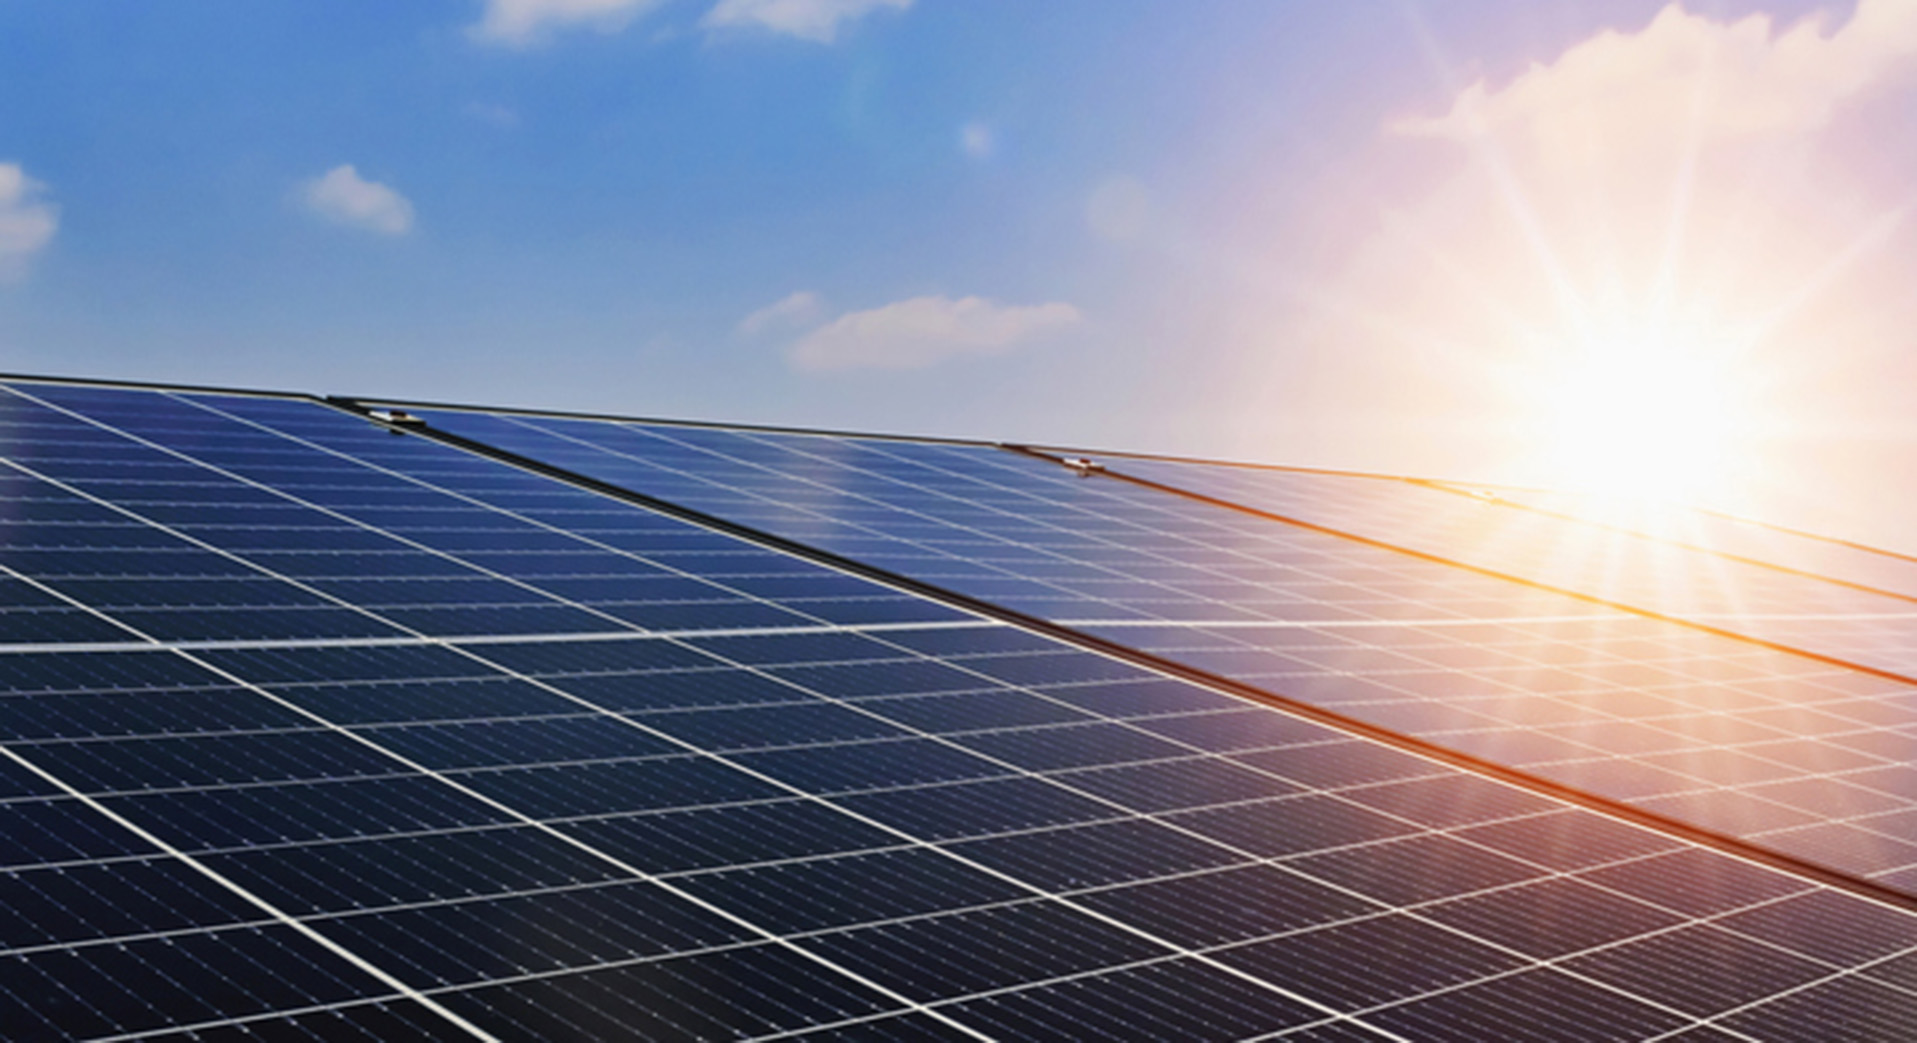 Photovoltaic energy: a natural source on which to firmly focus